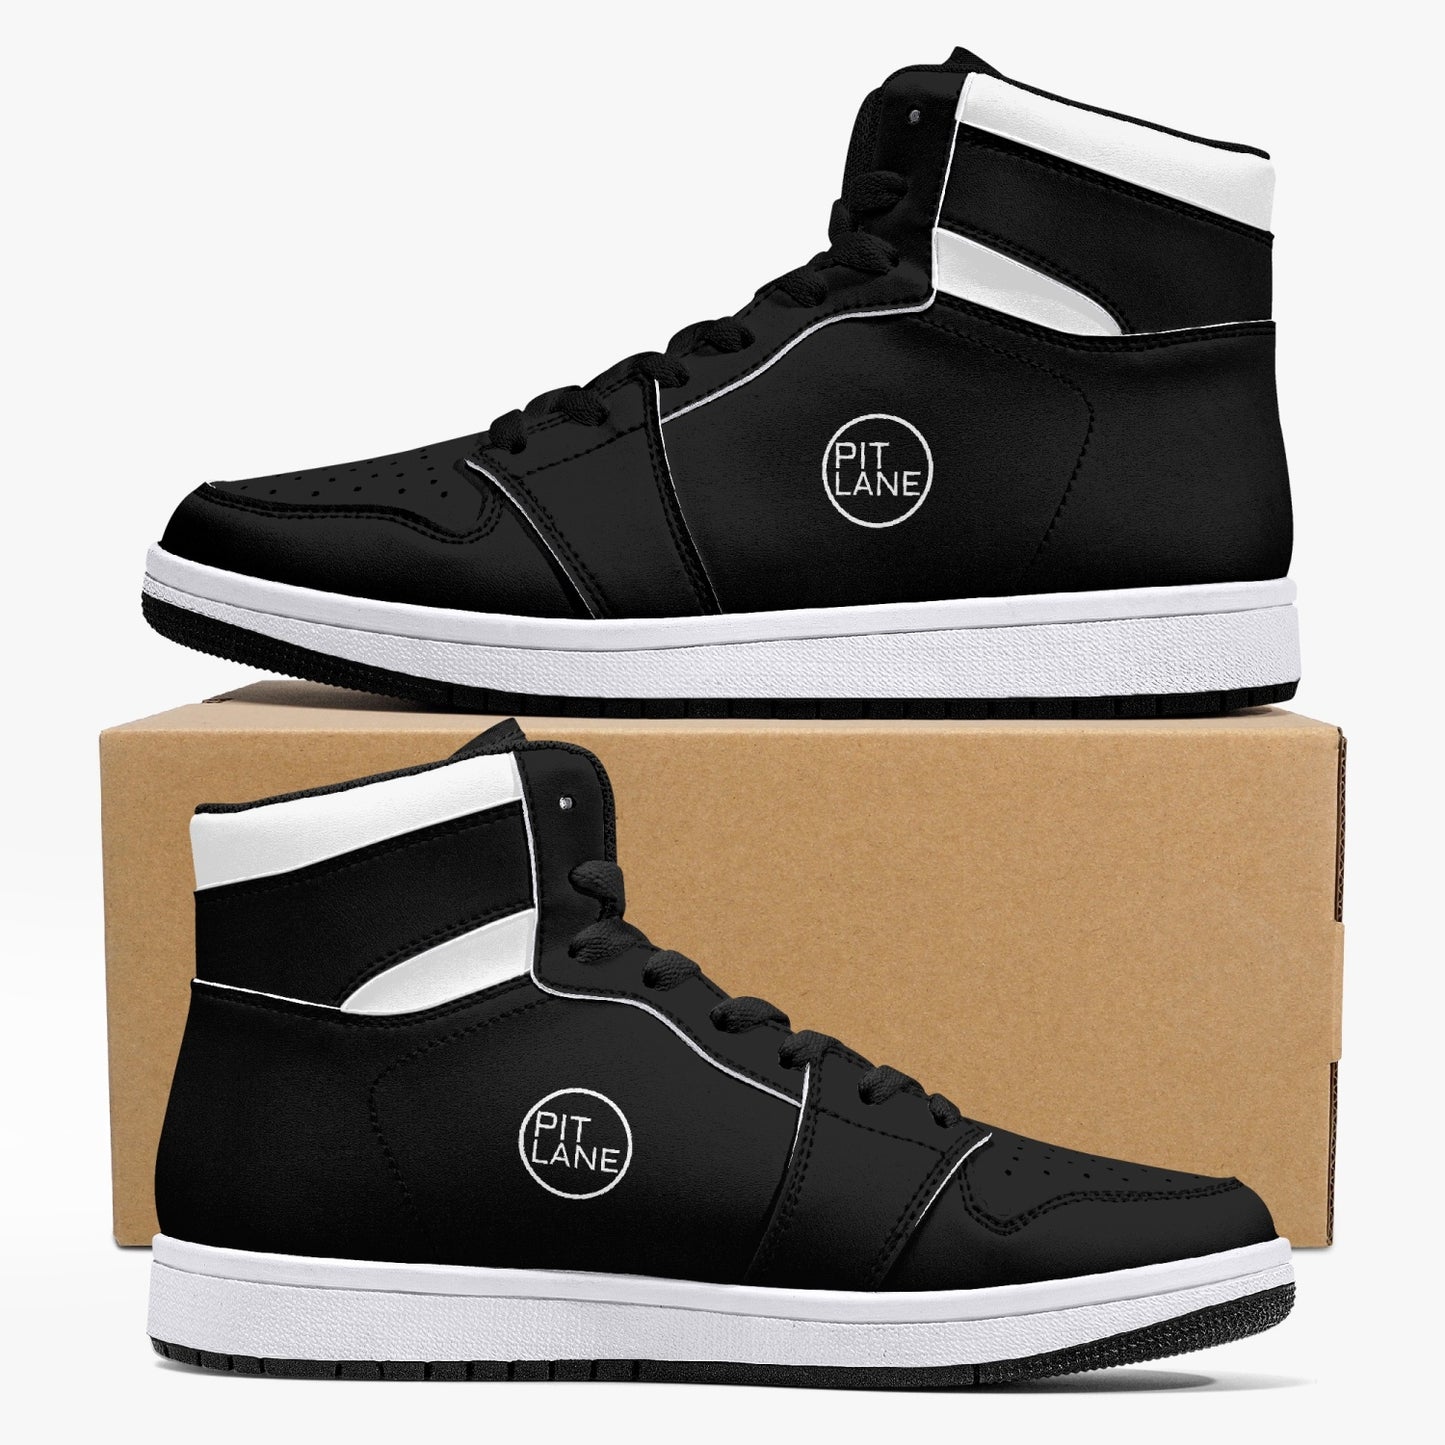 PIT LANE CLOTHING High-Top Full Leather Sneakers - carbon lite